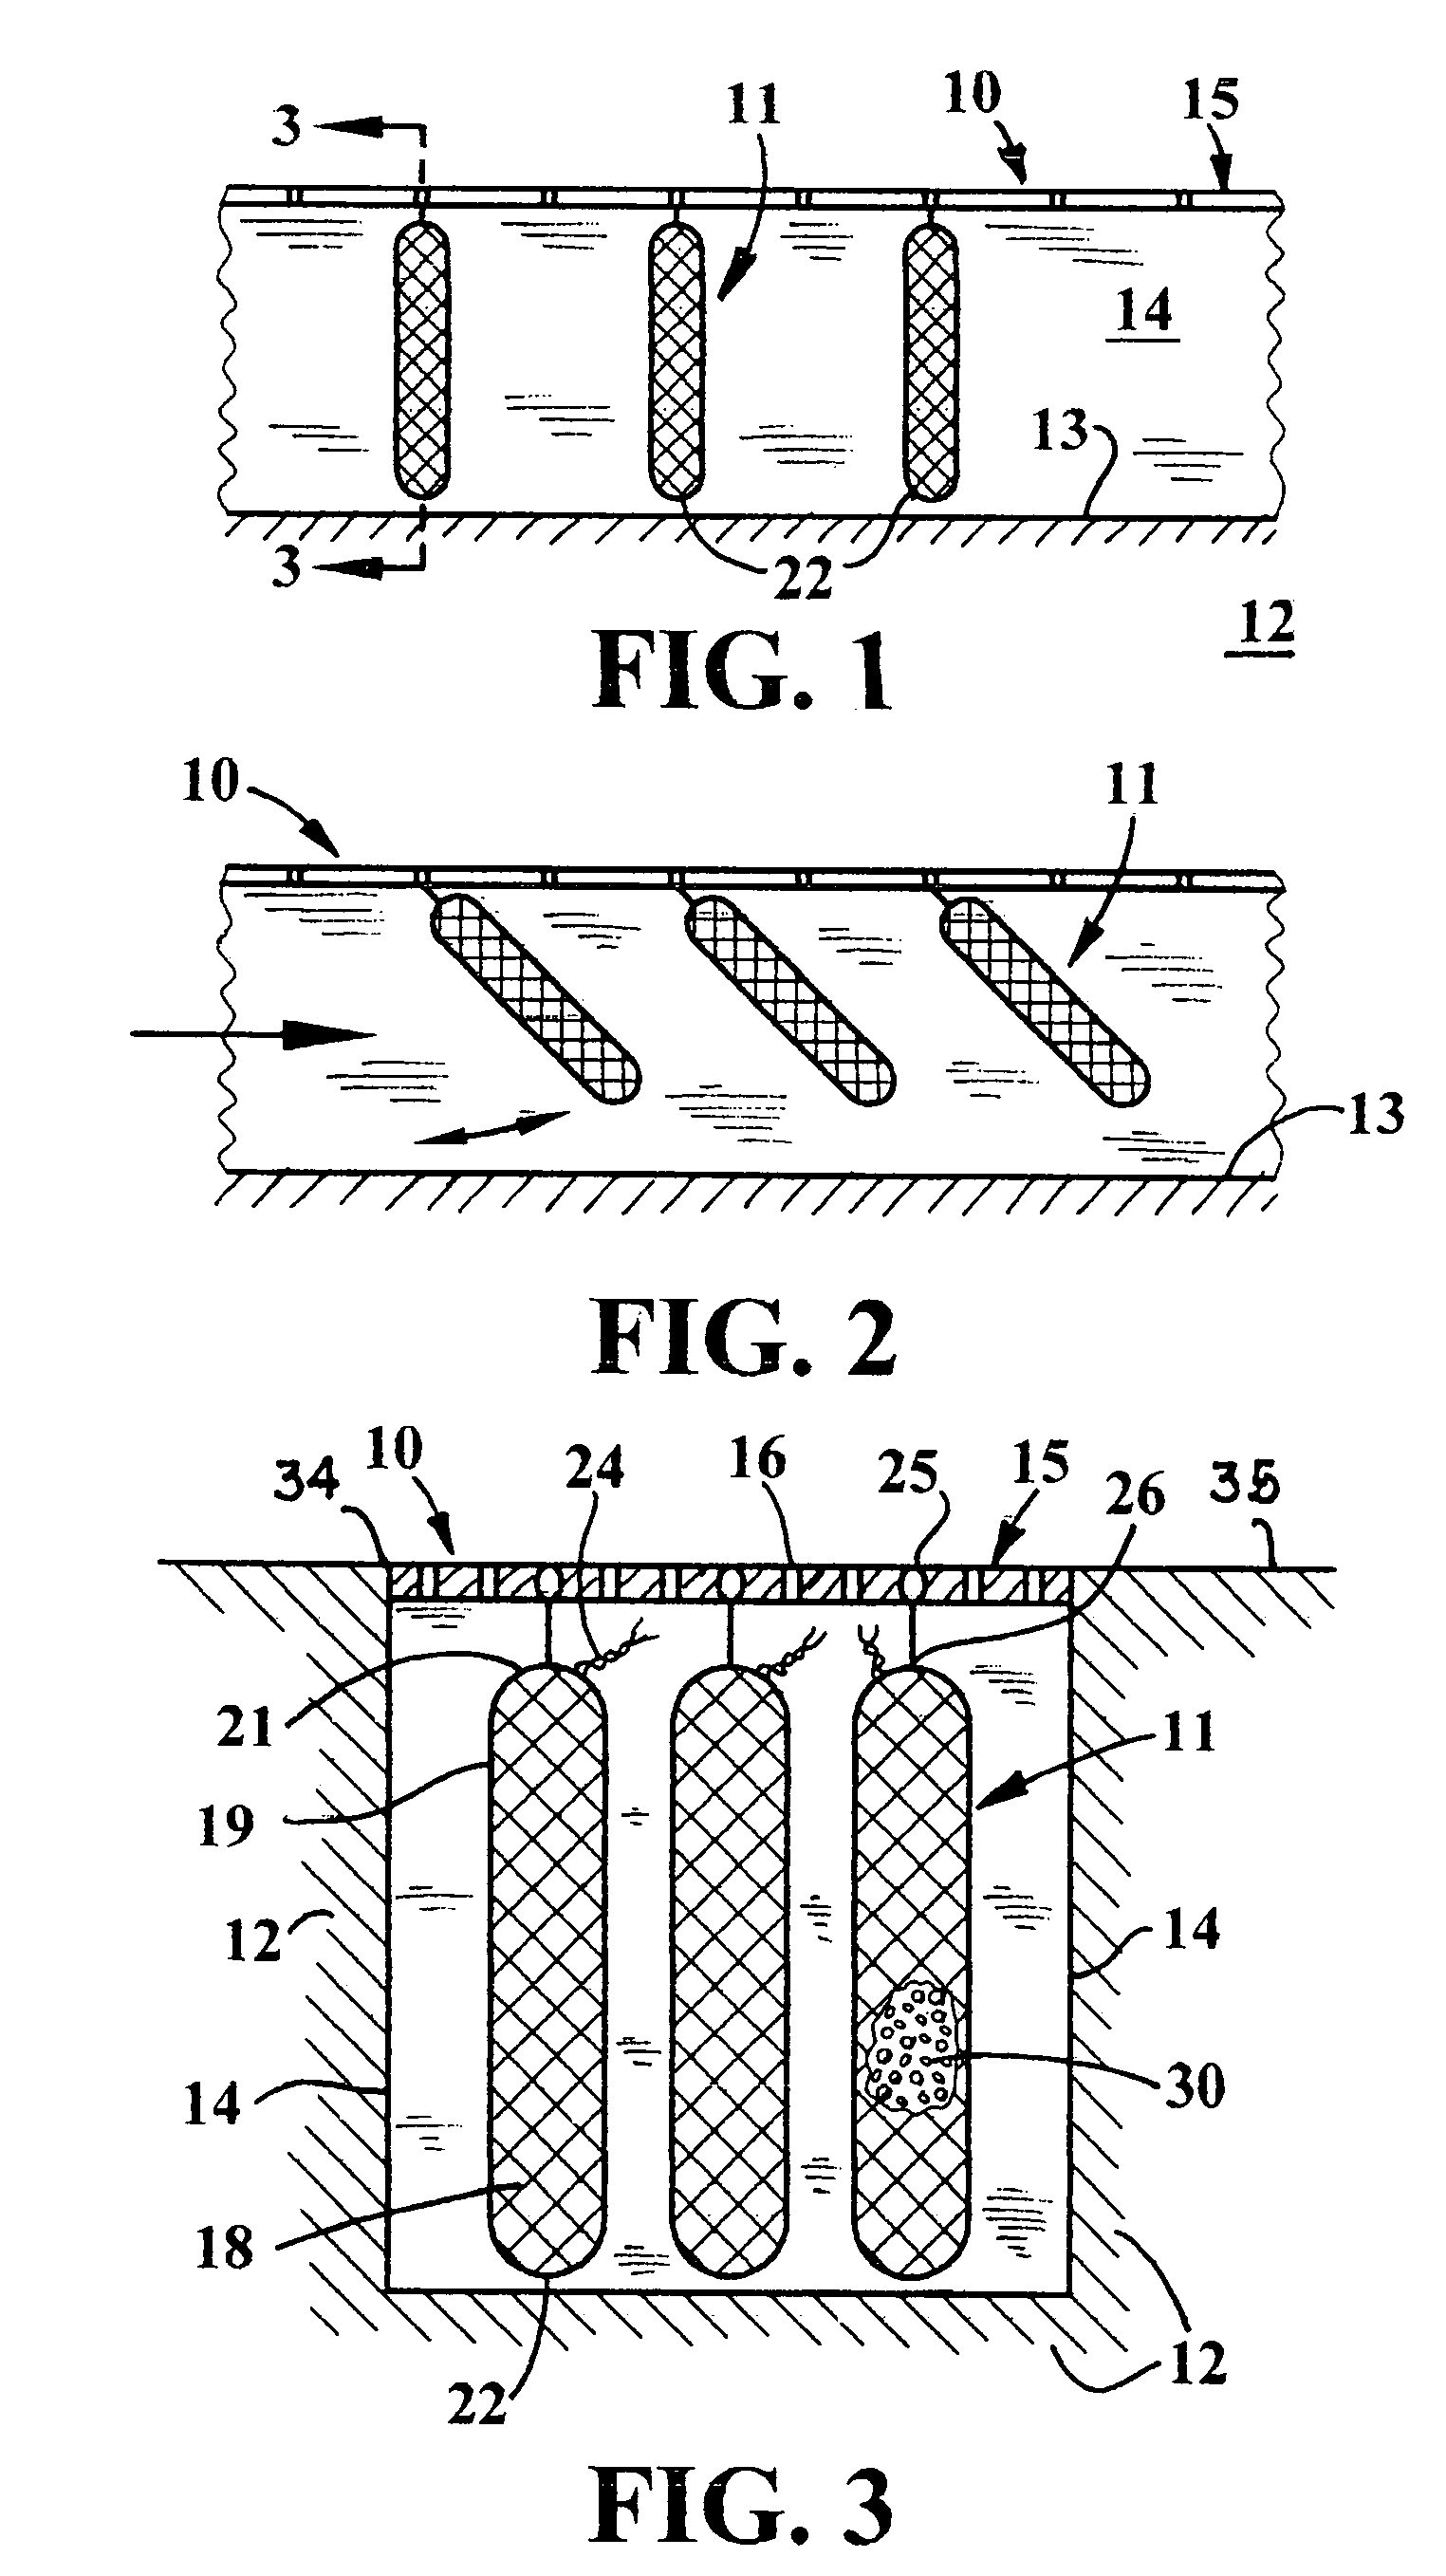 Treatment of water flowing in a horizontal conduit